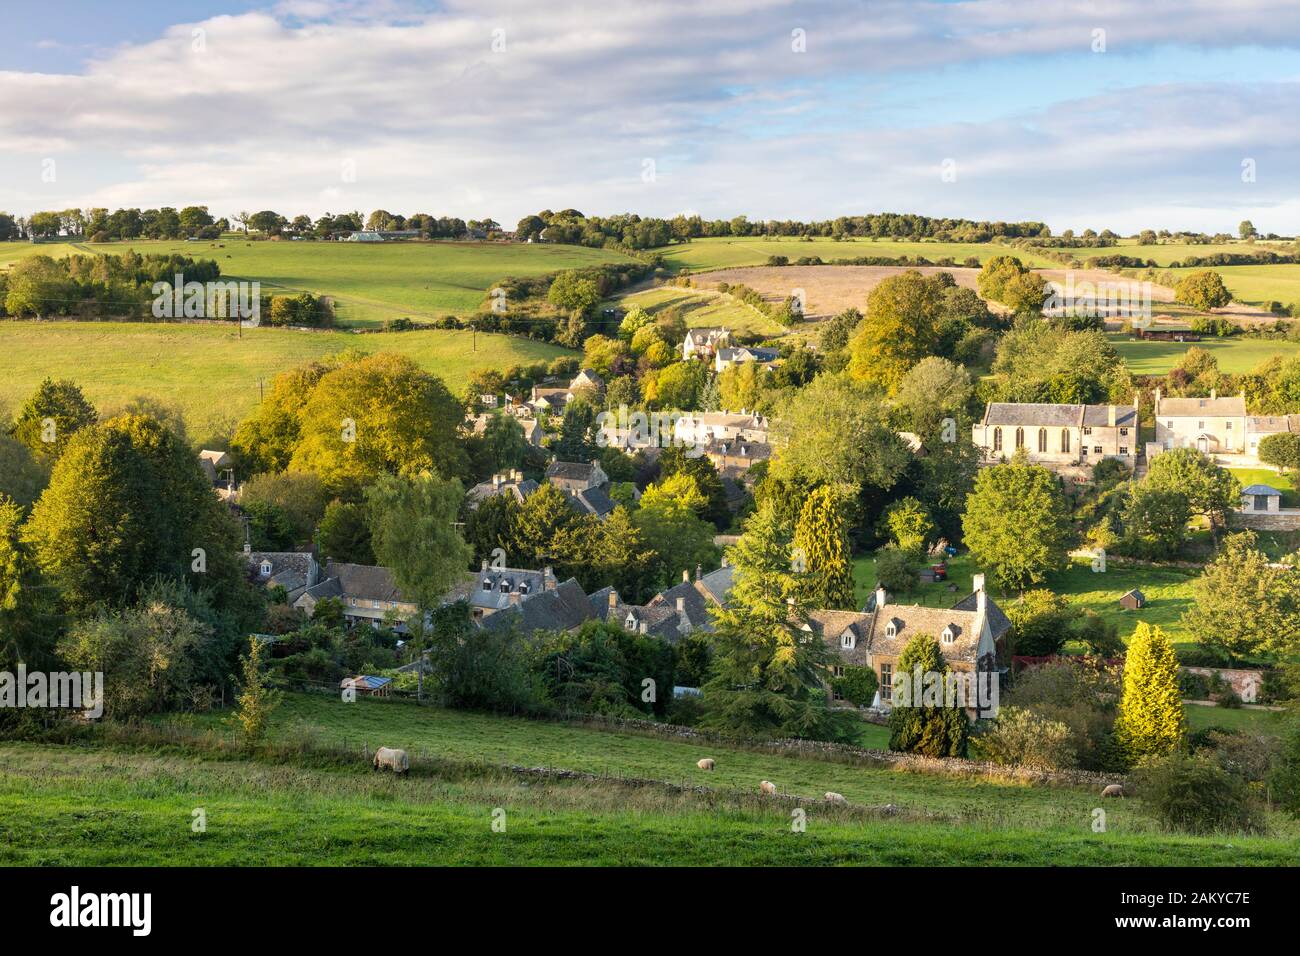 Evening view of country village of Naunton in the Cotswolds, Gloucestershire, England, UK Stock Photo